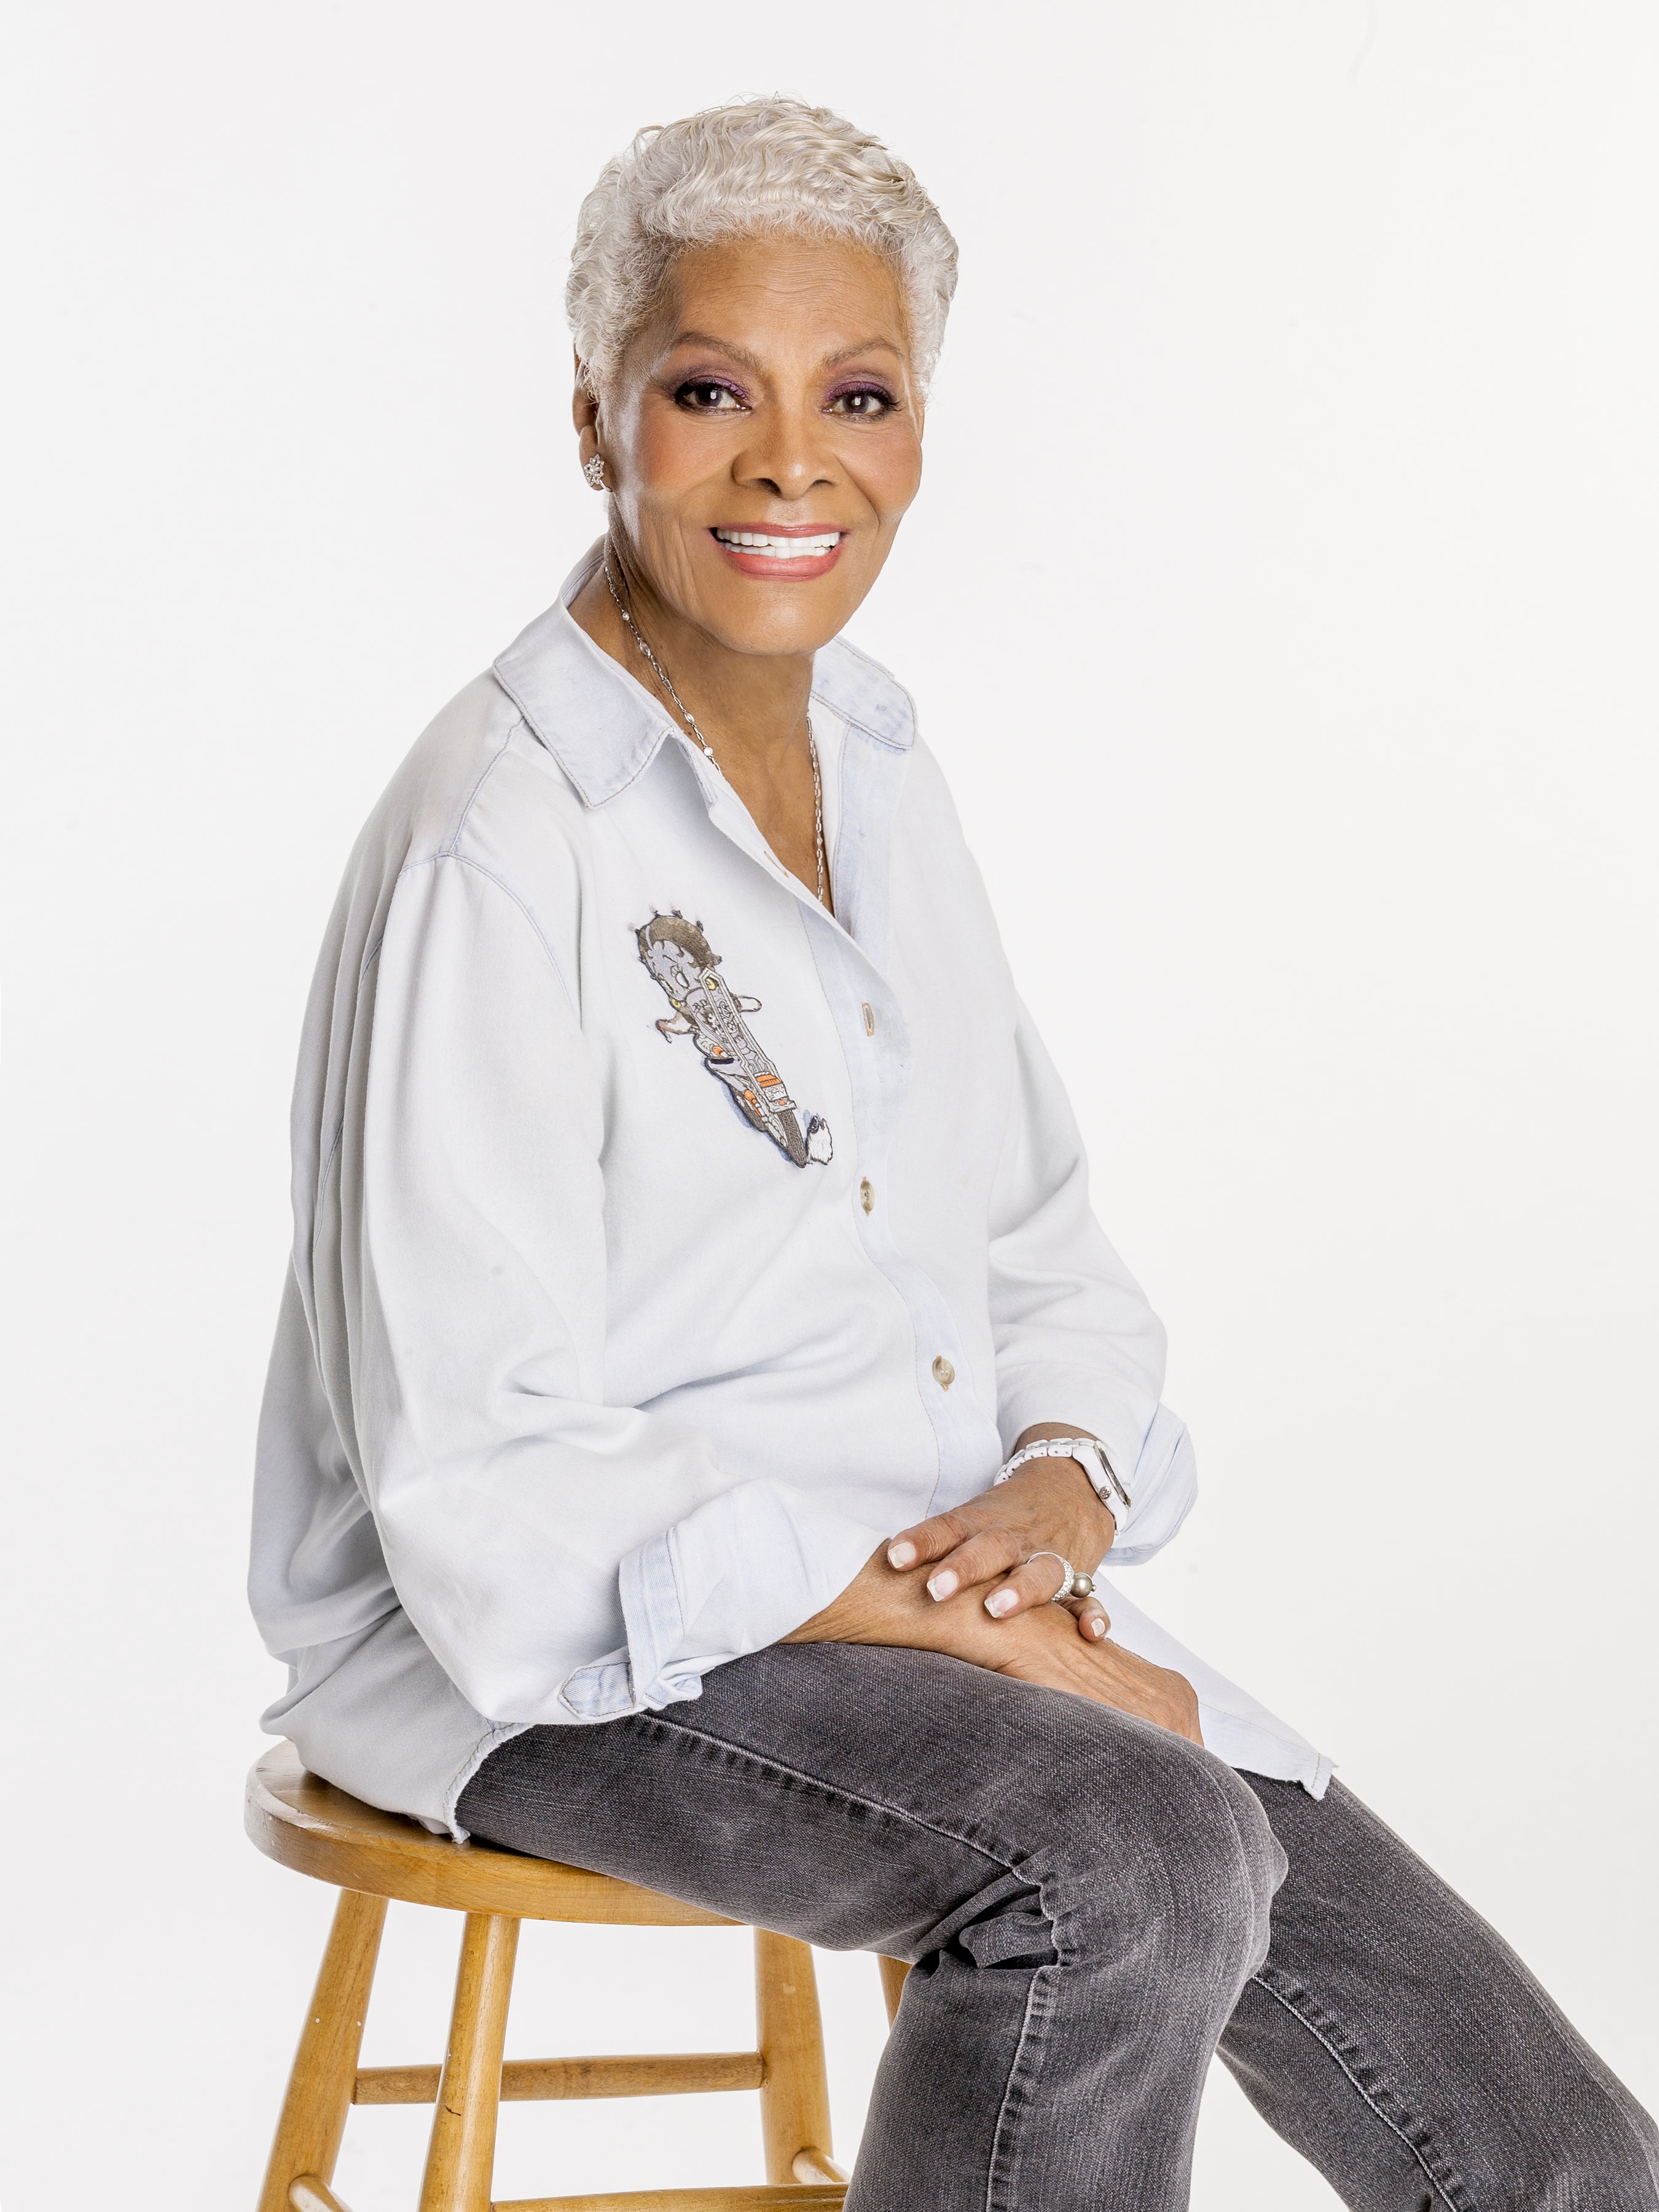 Dionne Warwick - Don't Make Me Over in Birmingham promo photo for Priority from O2 presale offer code